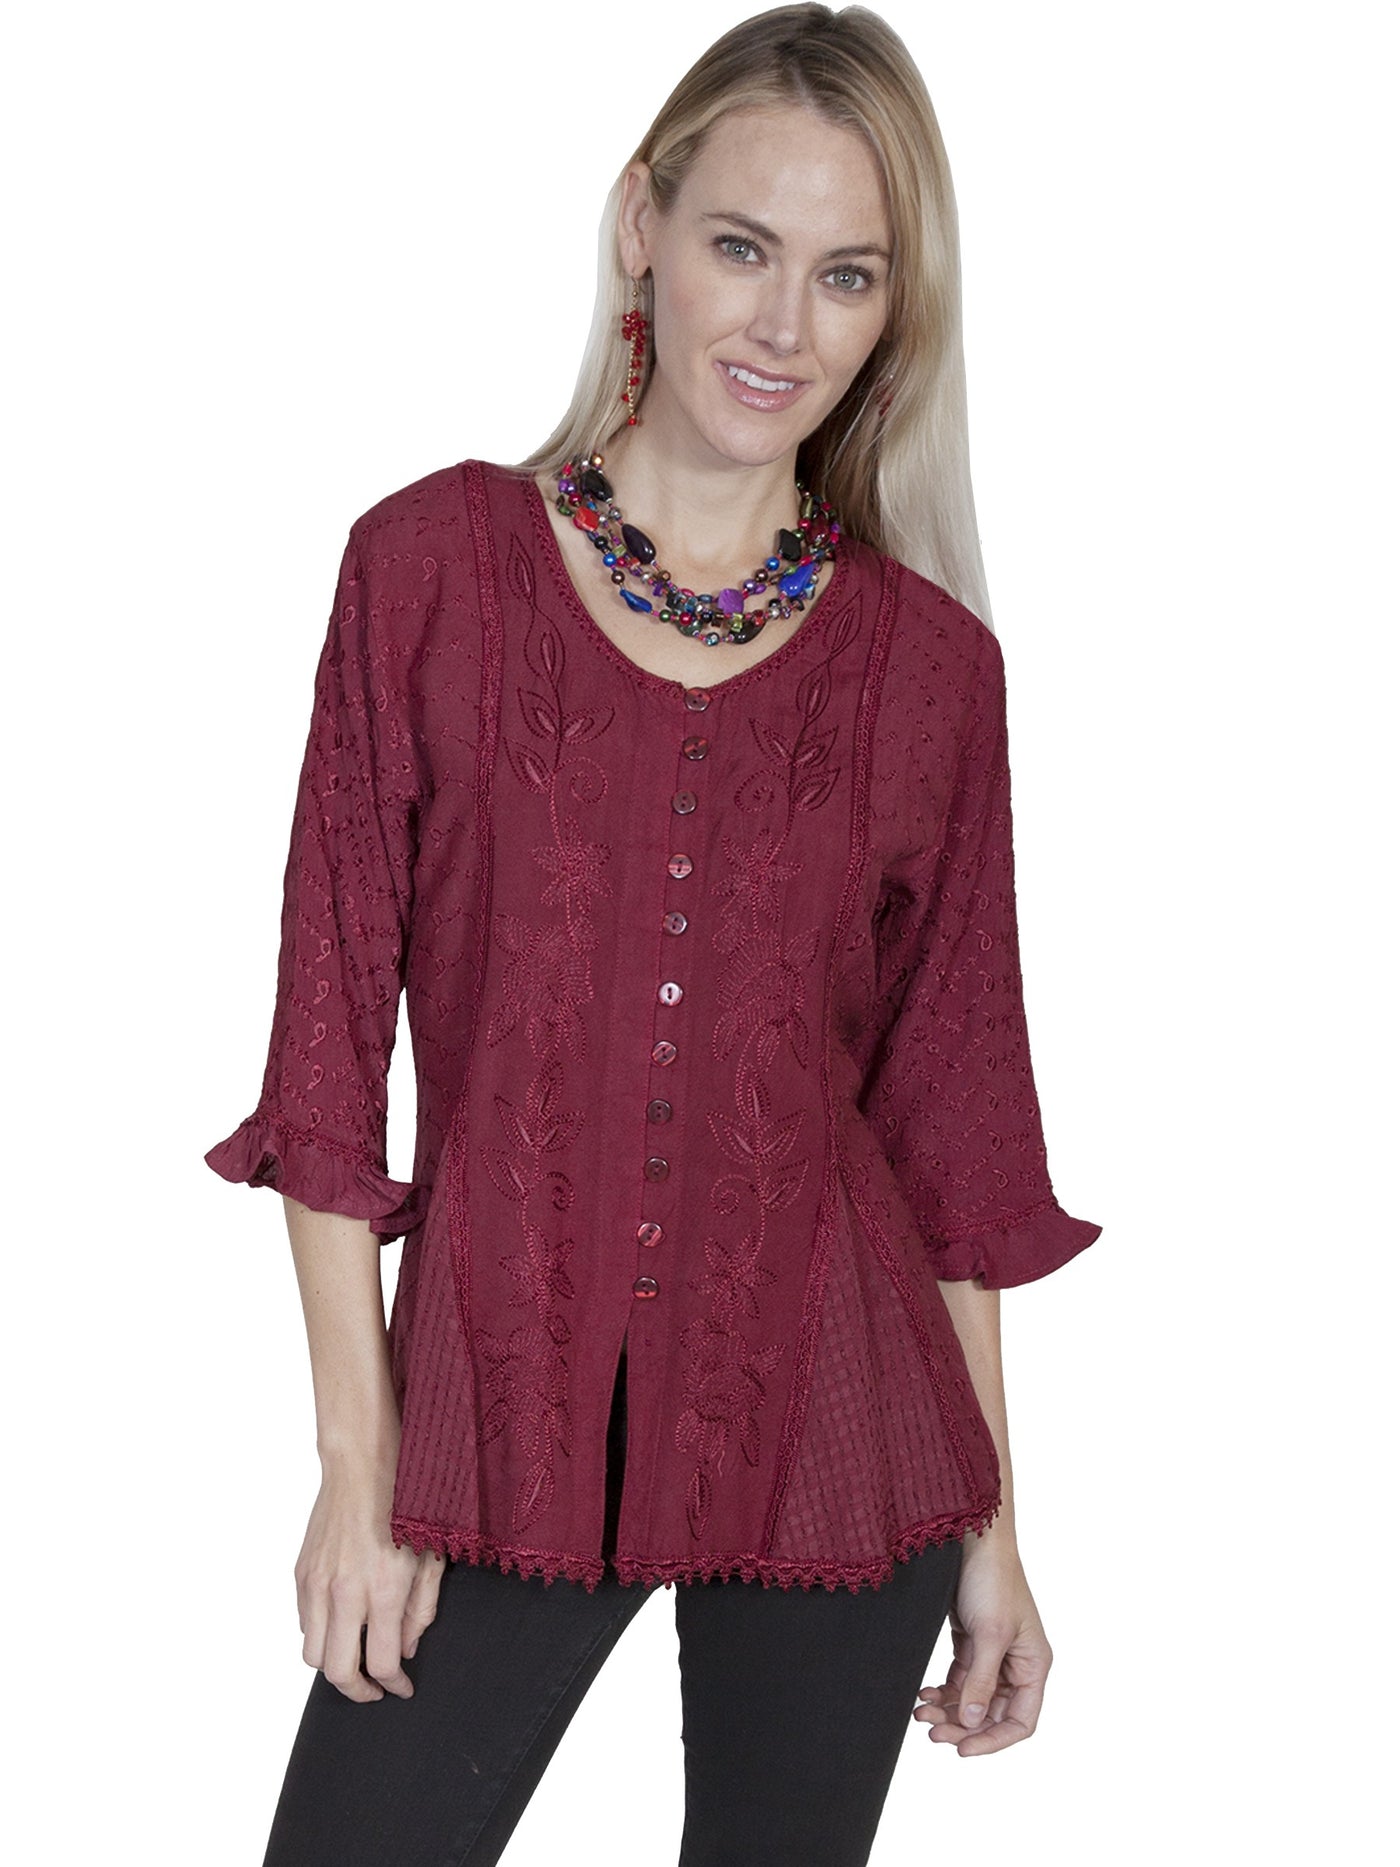 Cowgirl Multi-Fabric Blouse in Burgundy - SOLD OUT